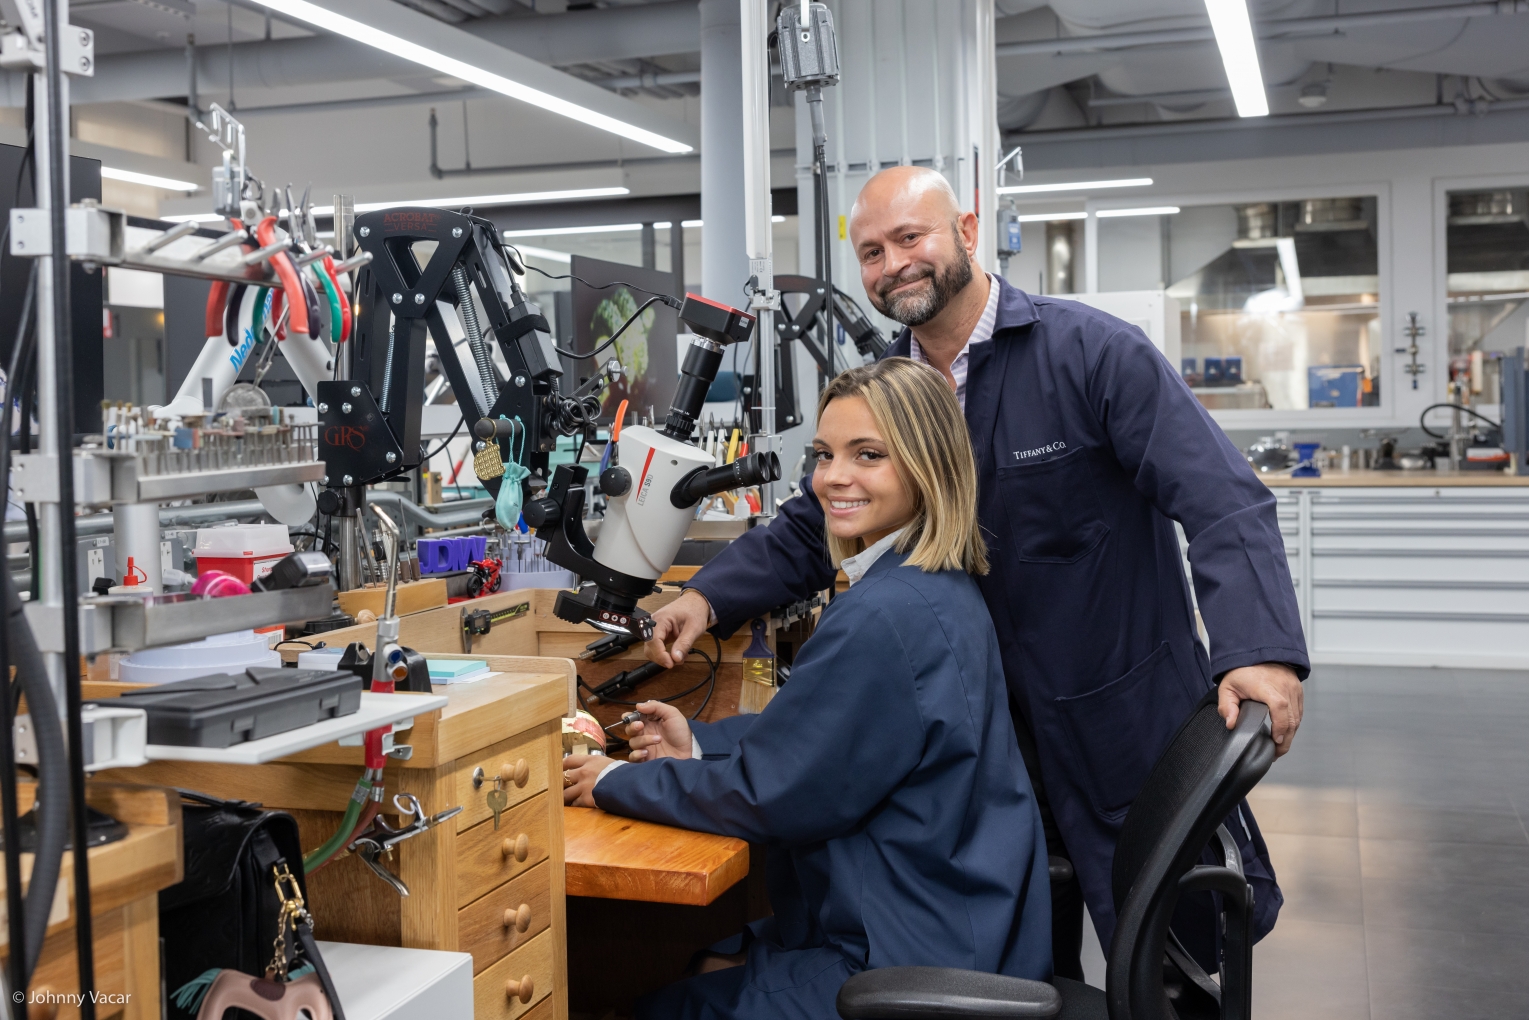 LVMH begins the Métiers d'Excellence Institute program in the U.S. with  Tiffany & Co. to train next generation of jewelry craftspeople - LVMH